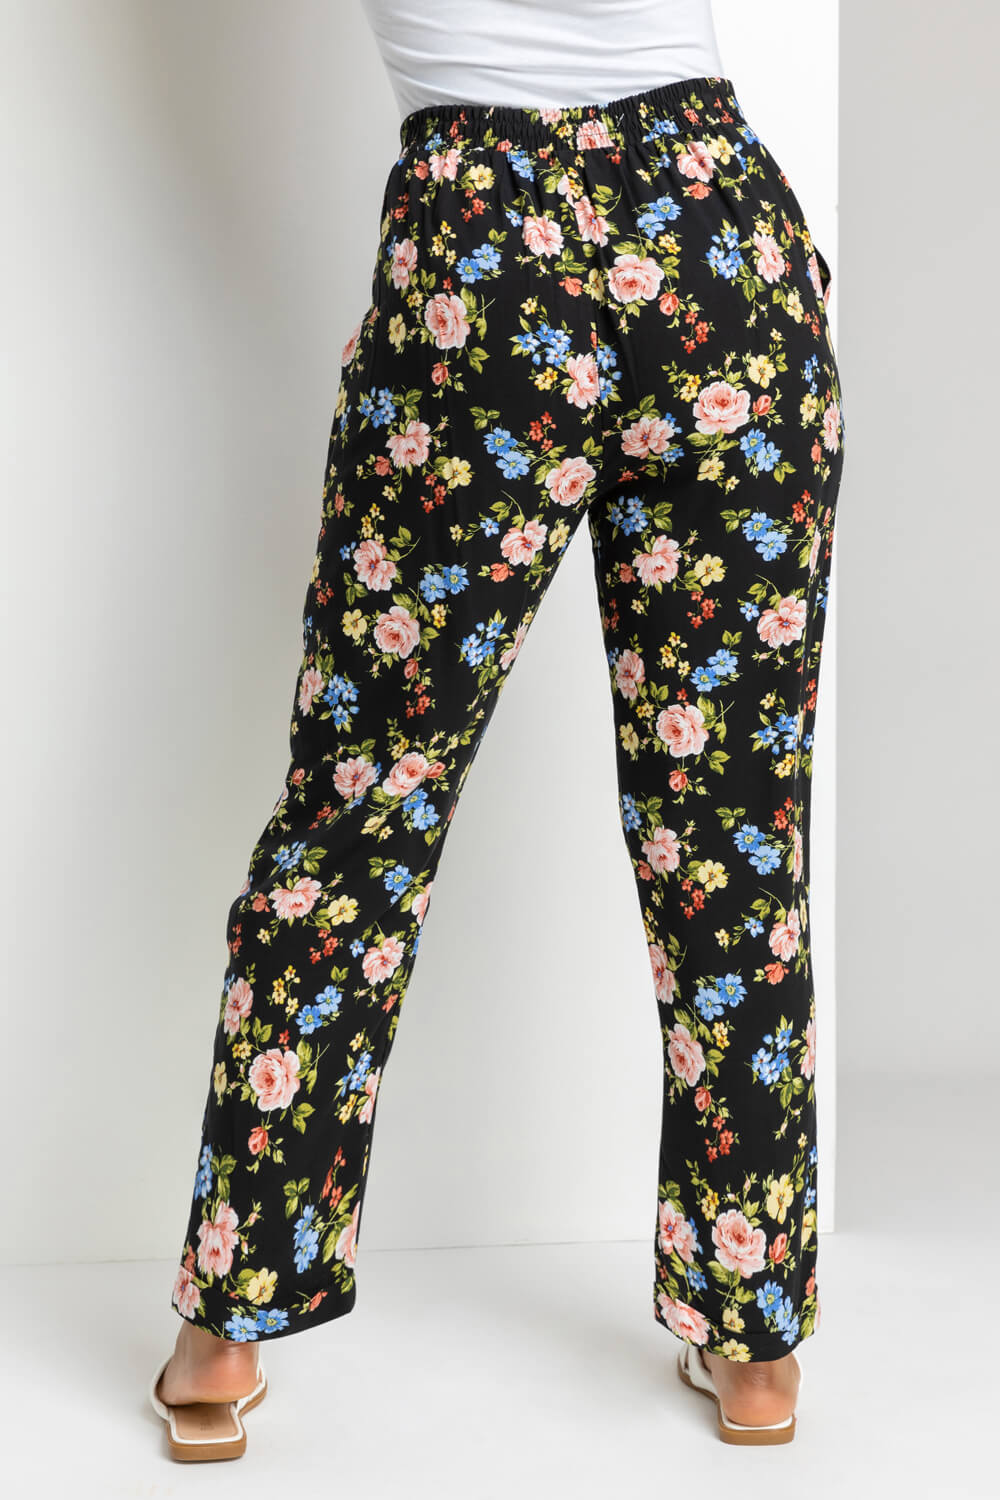 Black Petite Floral Print Tapered Trousers, Image 3 of 4